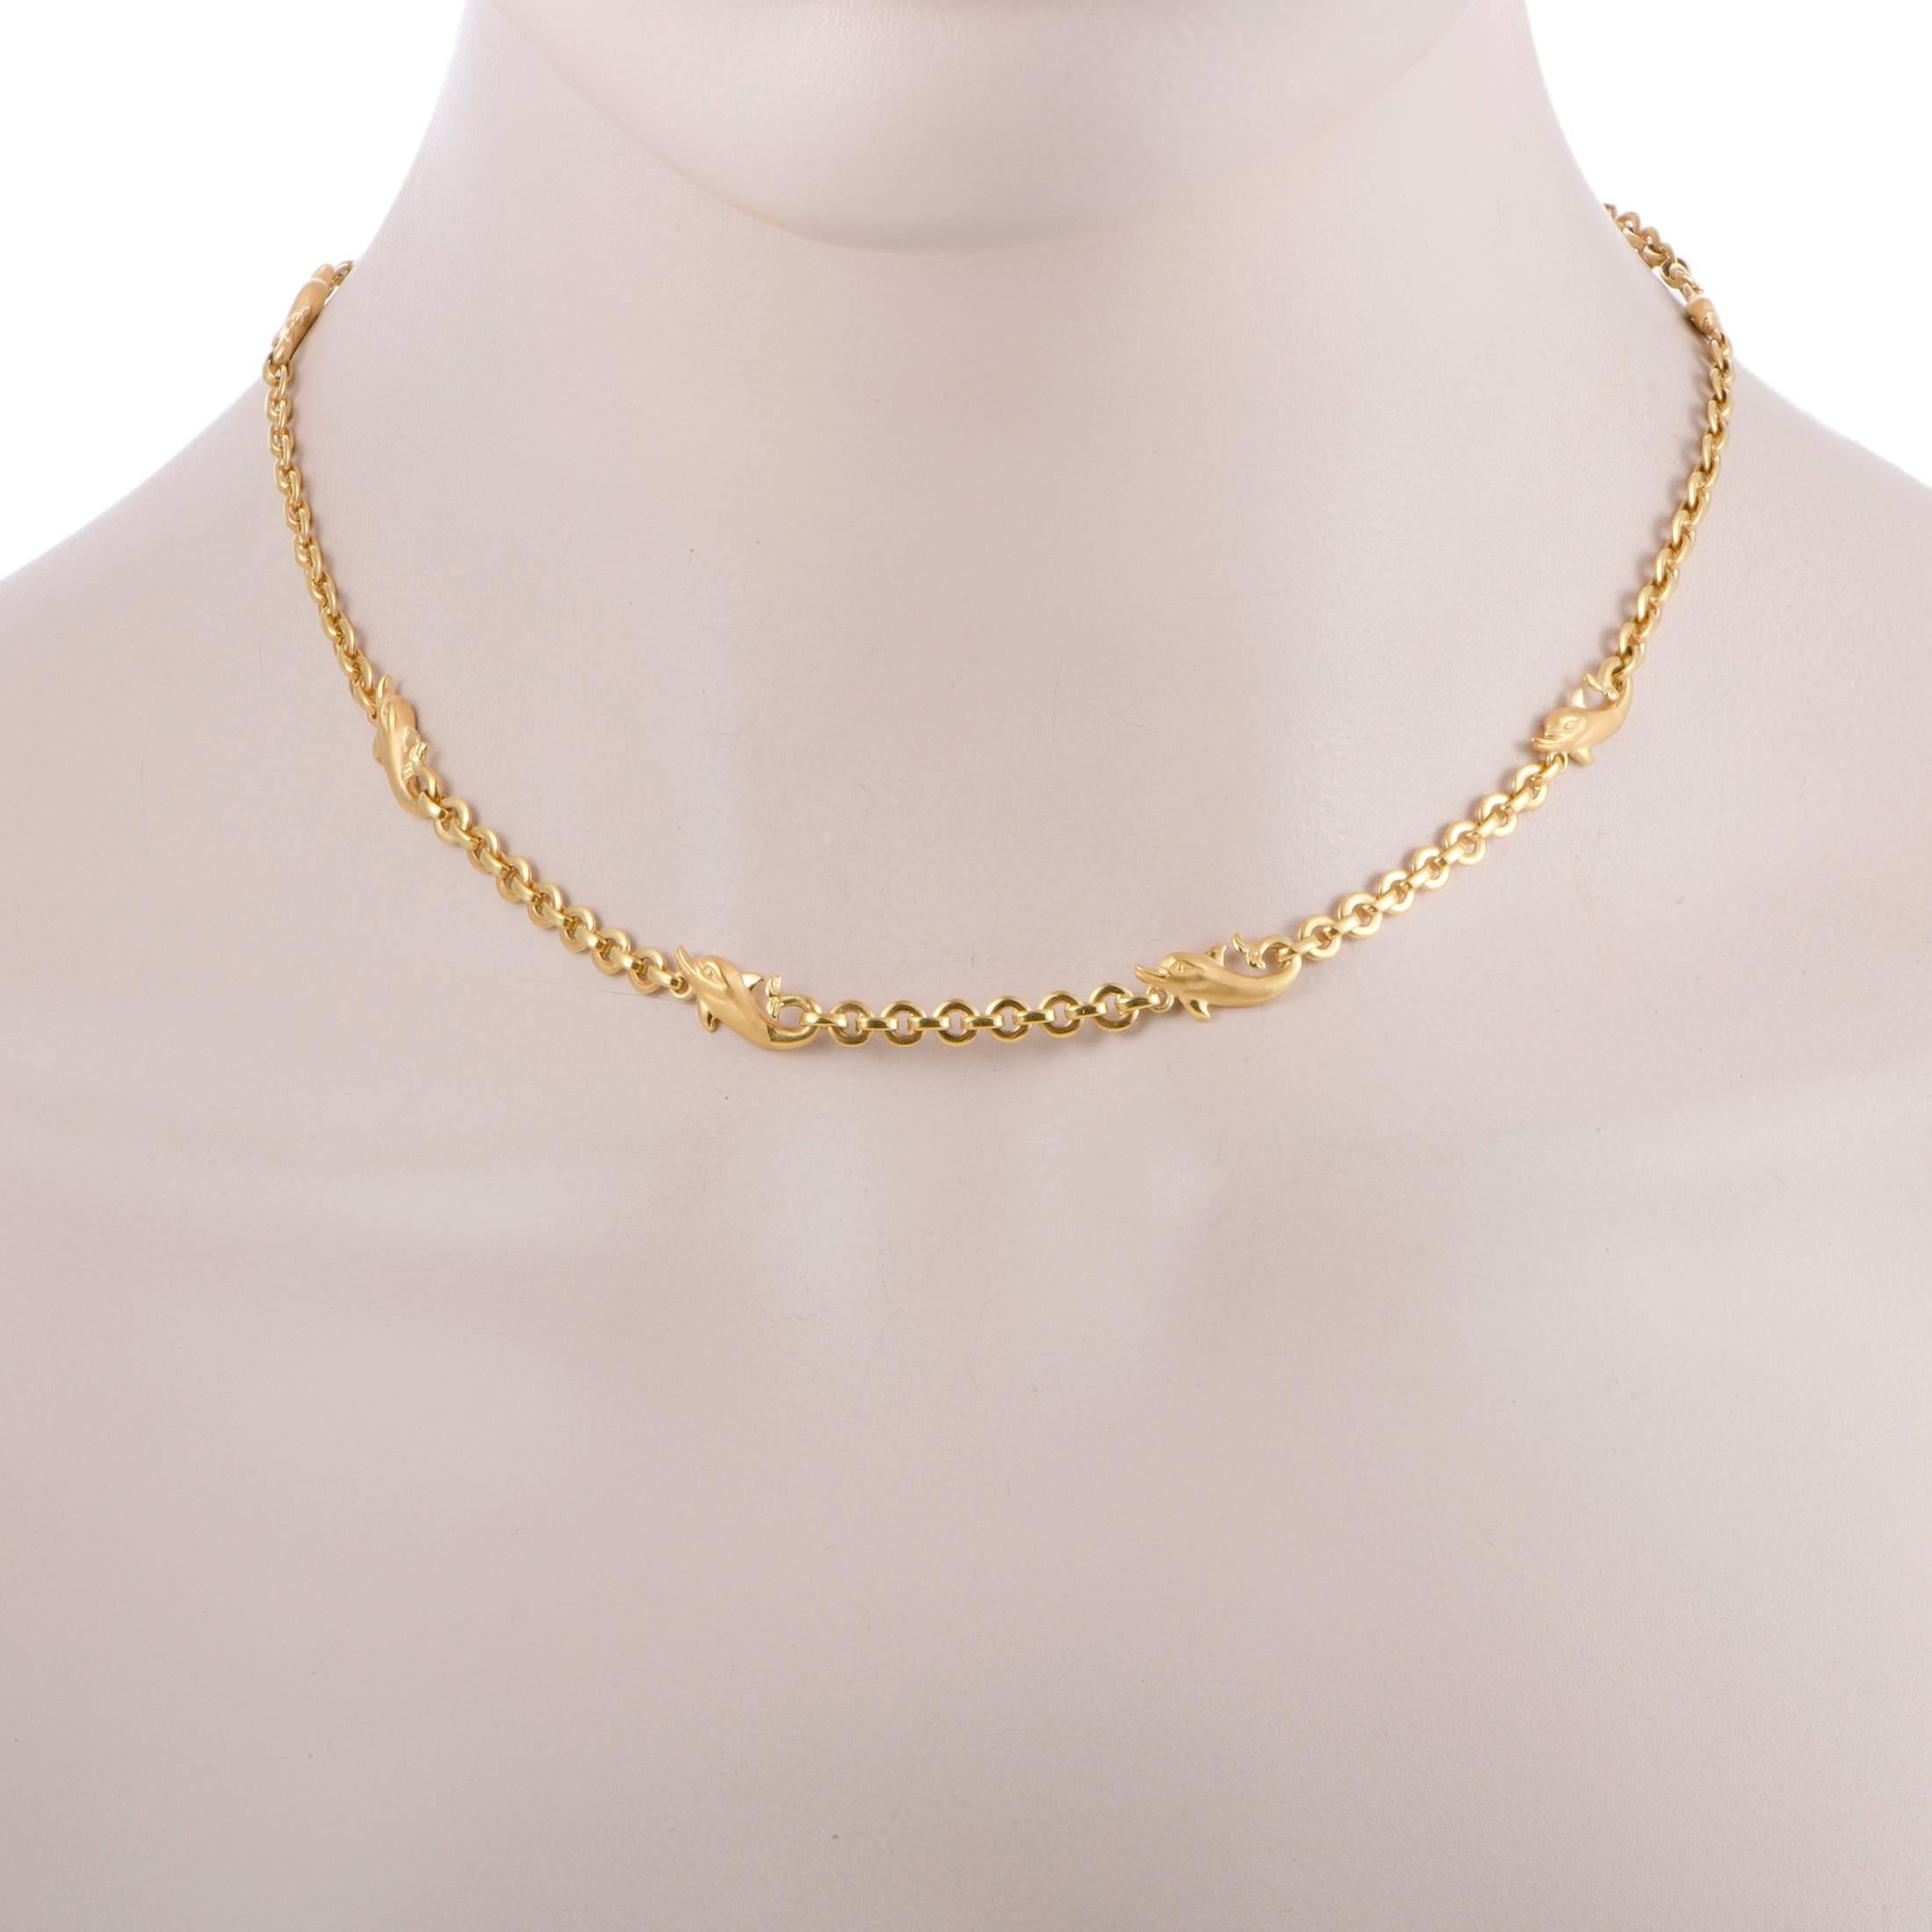 Polish your look with this gleaming round link chain necklace crafted in a luxe 18K gold by Carrera y Carrera. A series of exotic dolphin charms take center stage on this polished yellow gold necklace to lend eye-catching shine and trendy charm to